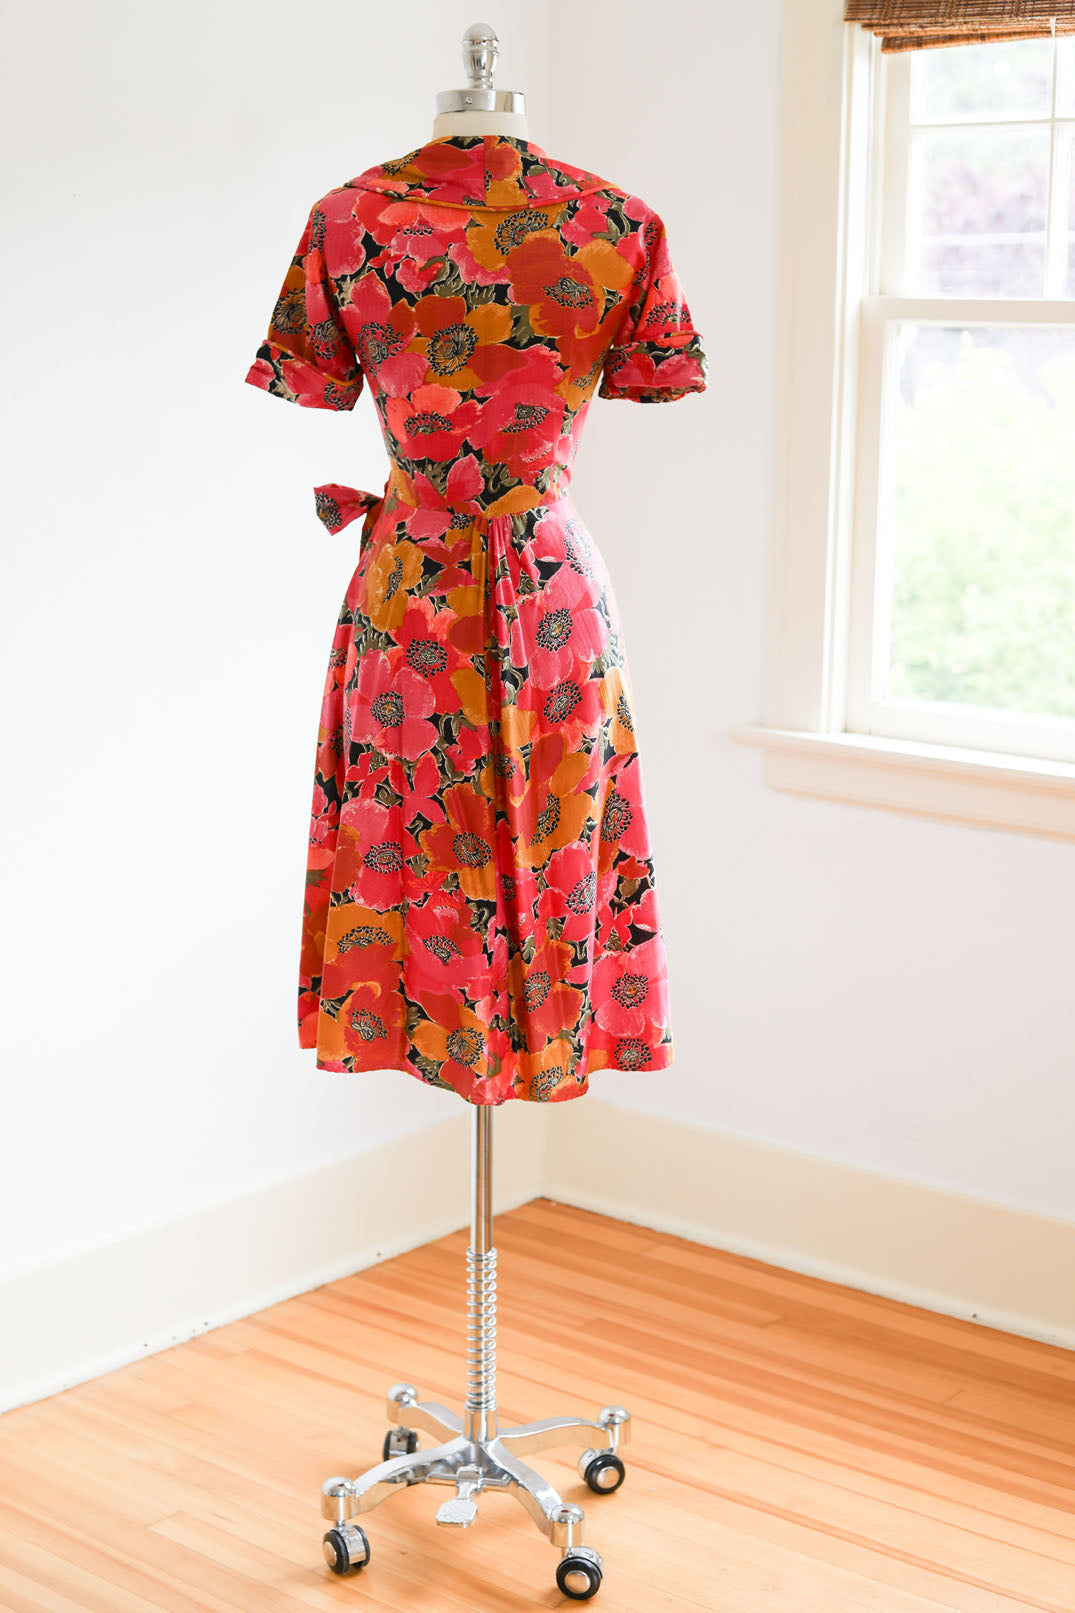 Vintage 1940s? 1970s? Wrap Dress - GORGEOUS Saturated Pink Sienna Black Poppy Floral Print Lounging Robe Frock Size XS - M